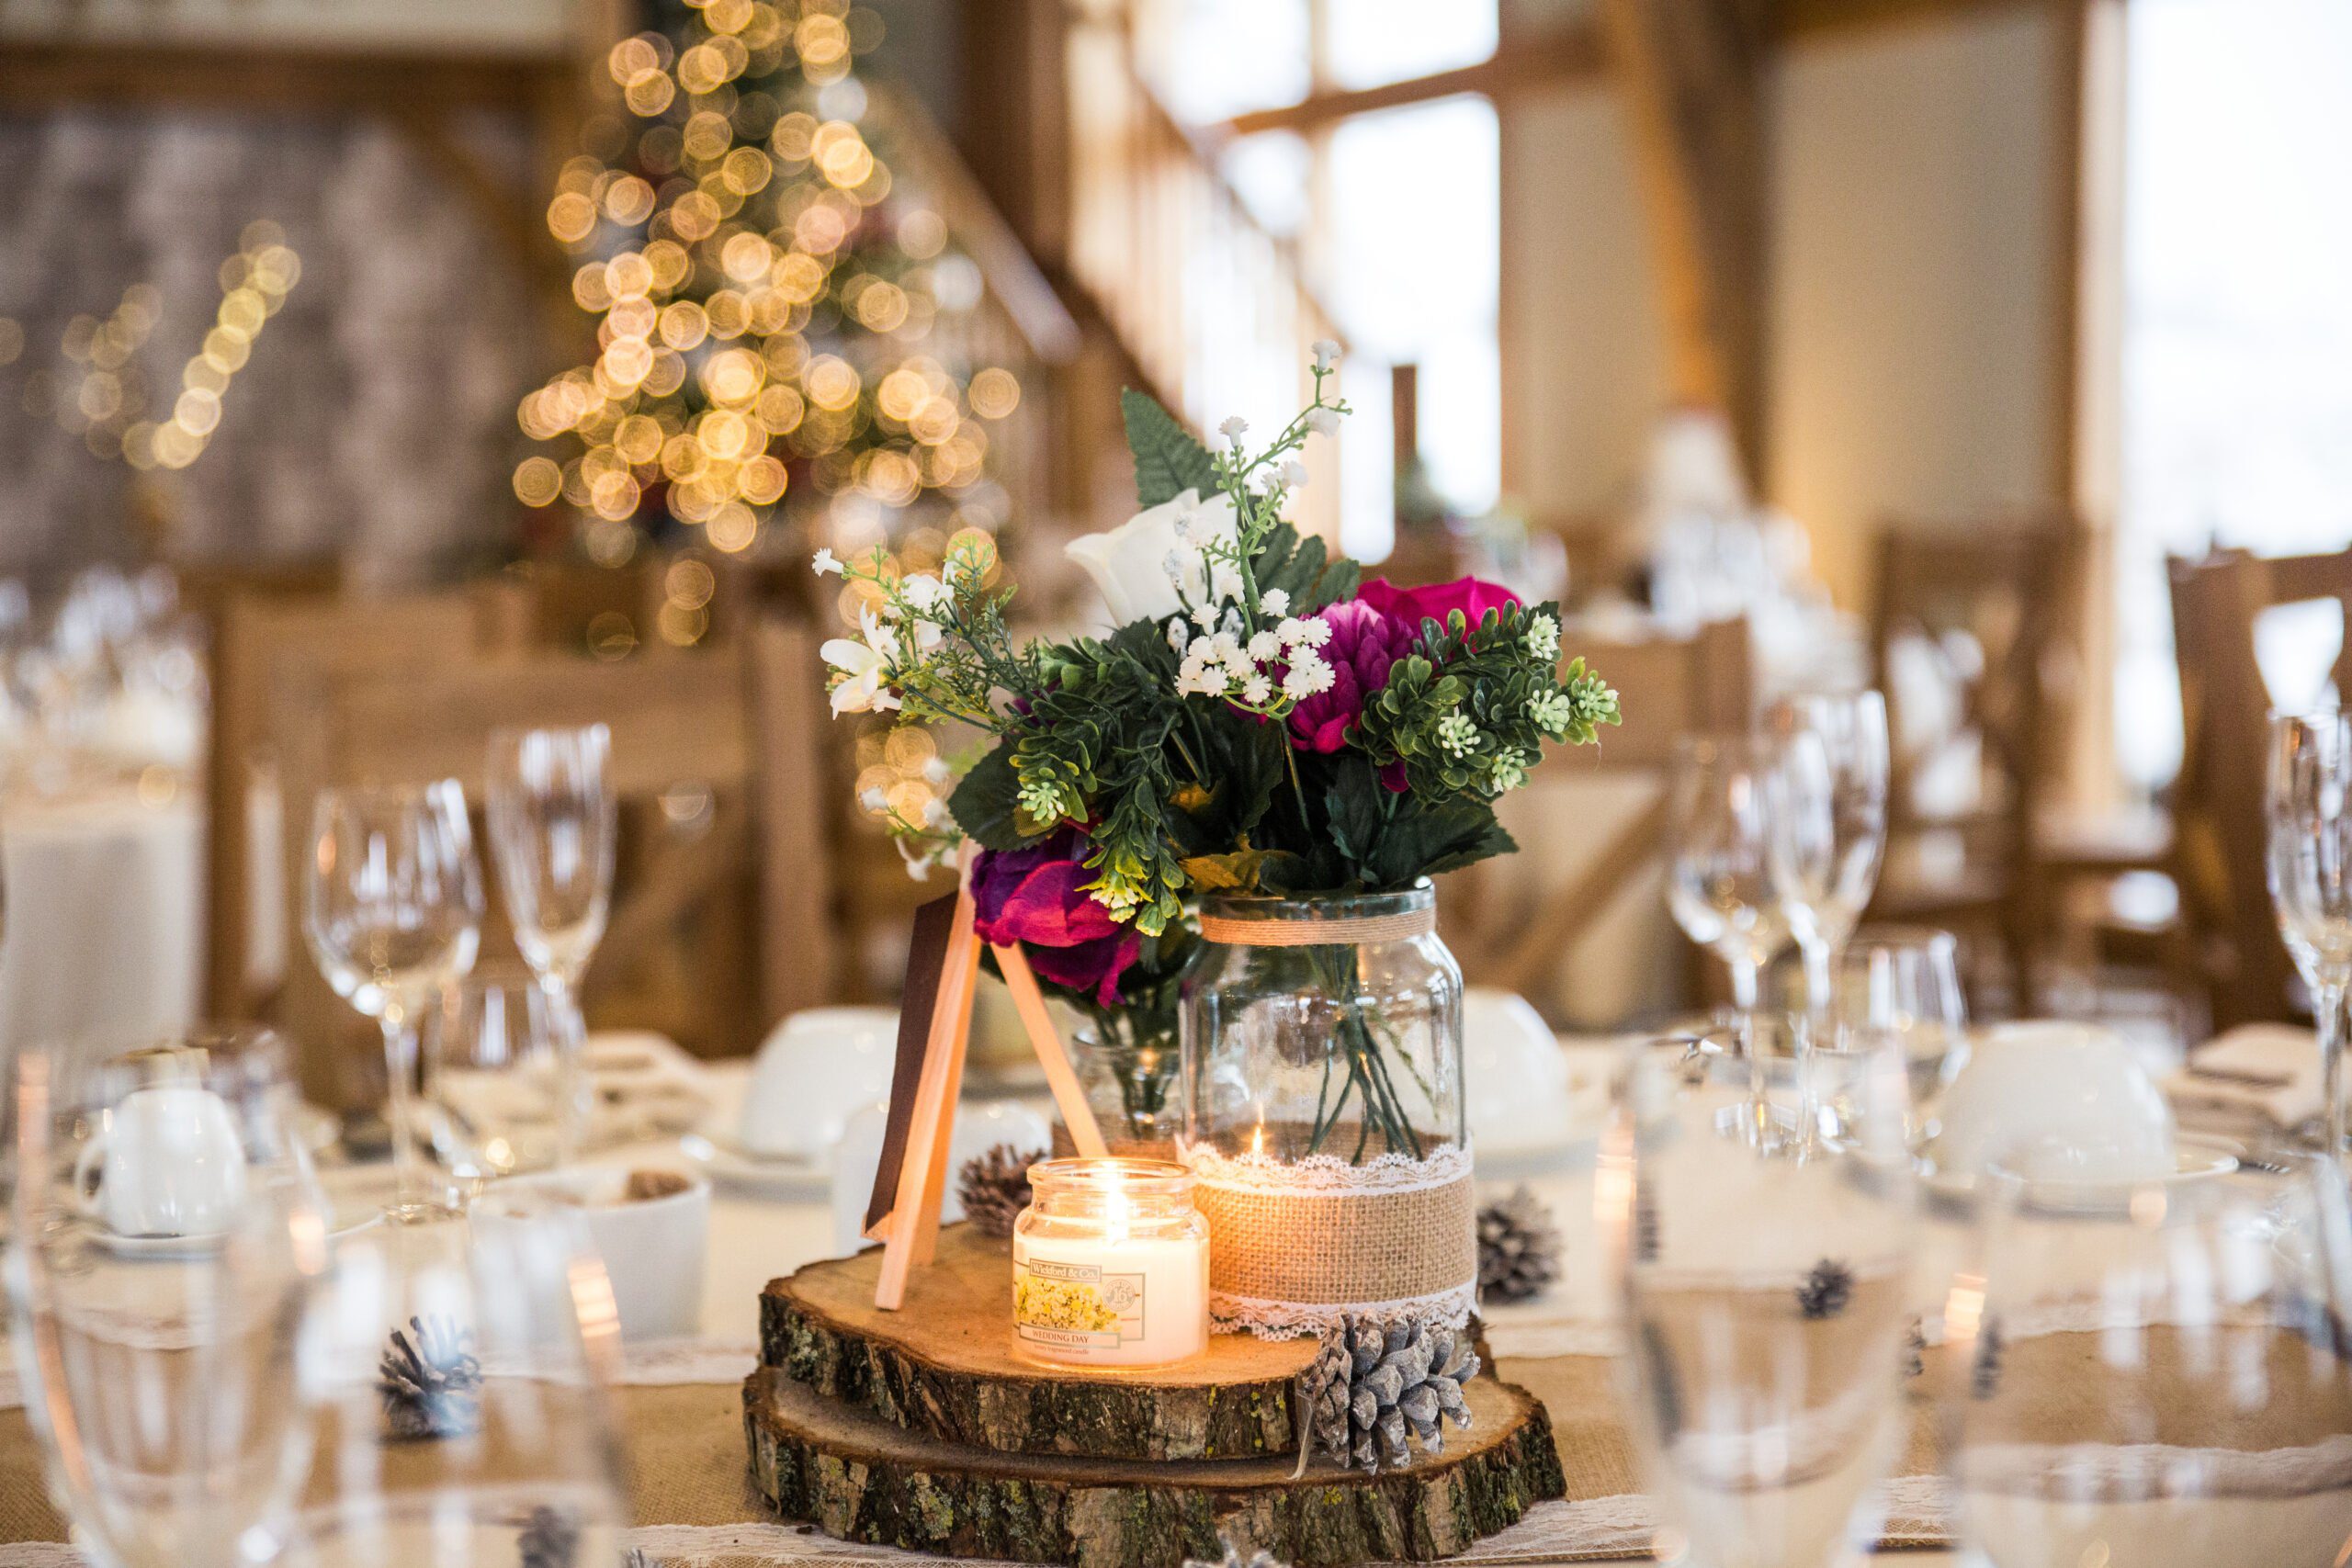 wedding table decor floral flower display on wooden logs with christmas lights in the background, photo by Richard Miller Photography